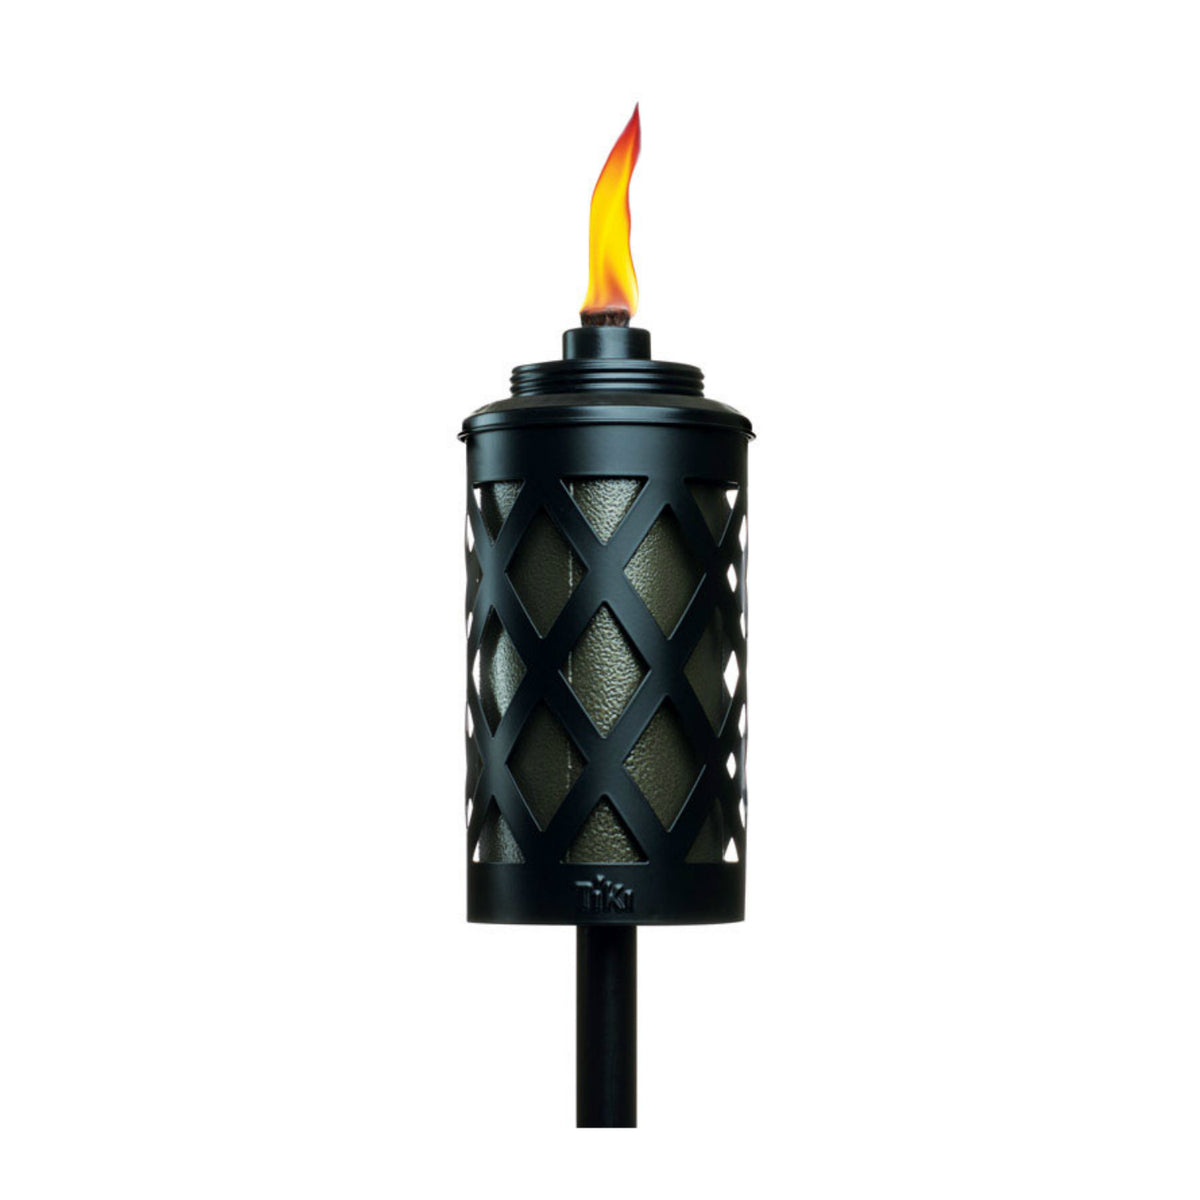 buy torches at cheap rate in bulk. wholesale & retail lawn & garden lighting & statues store.